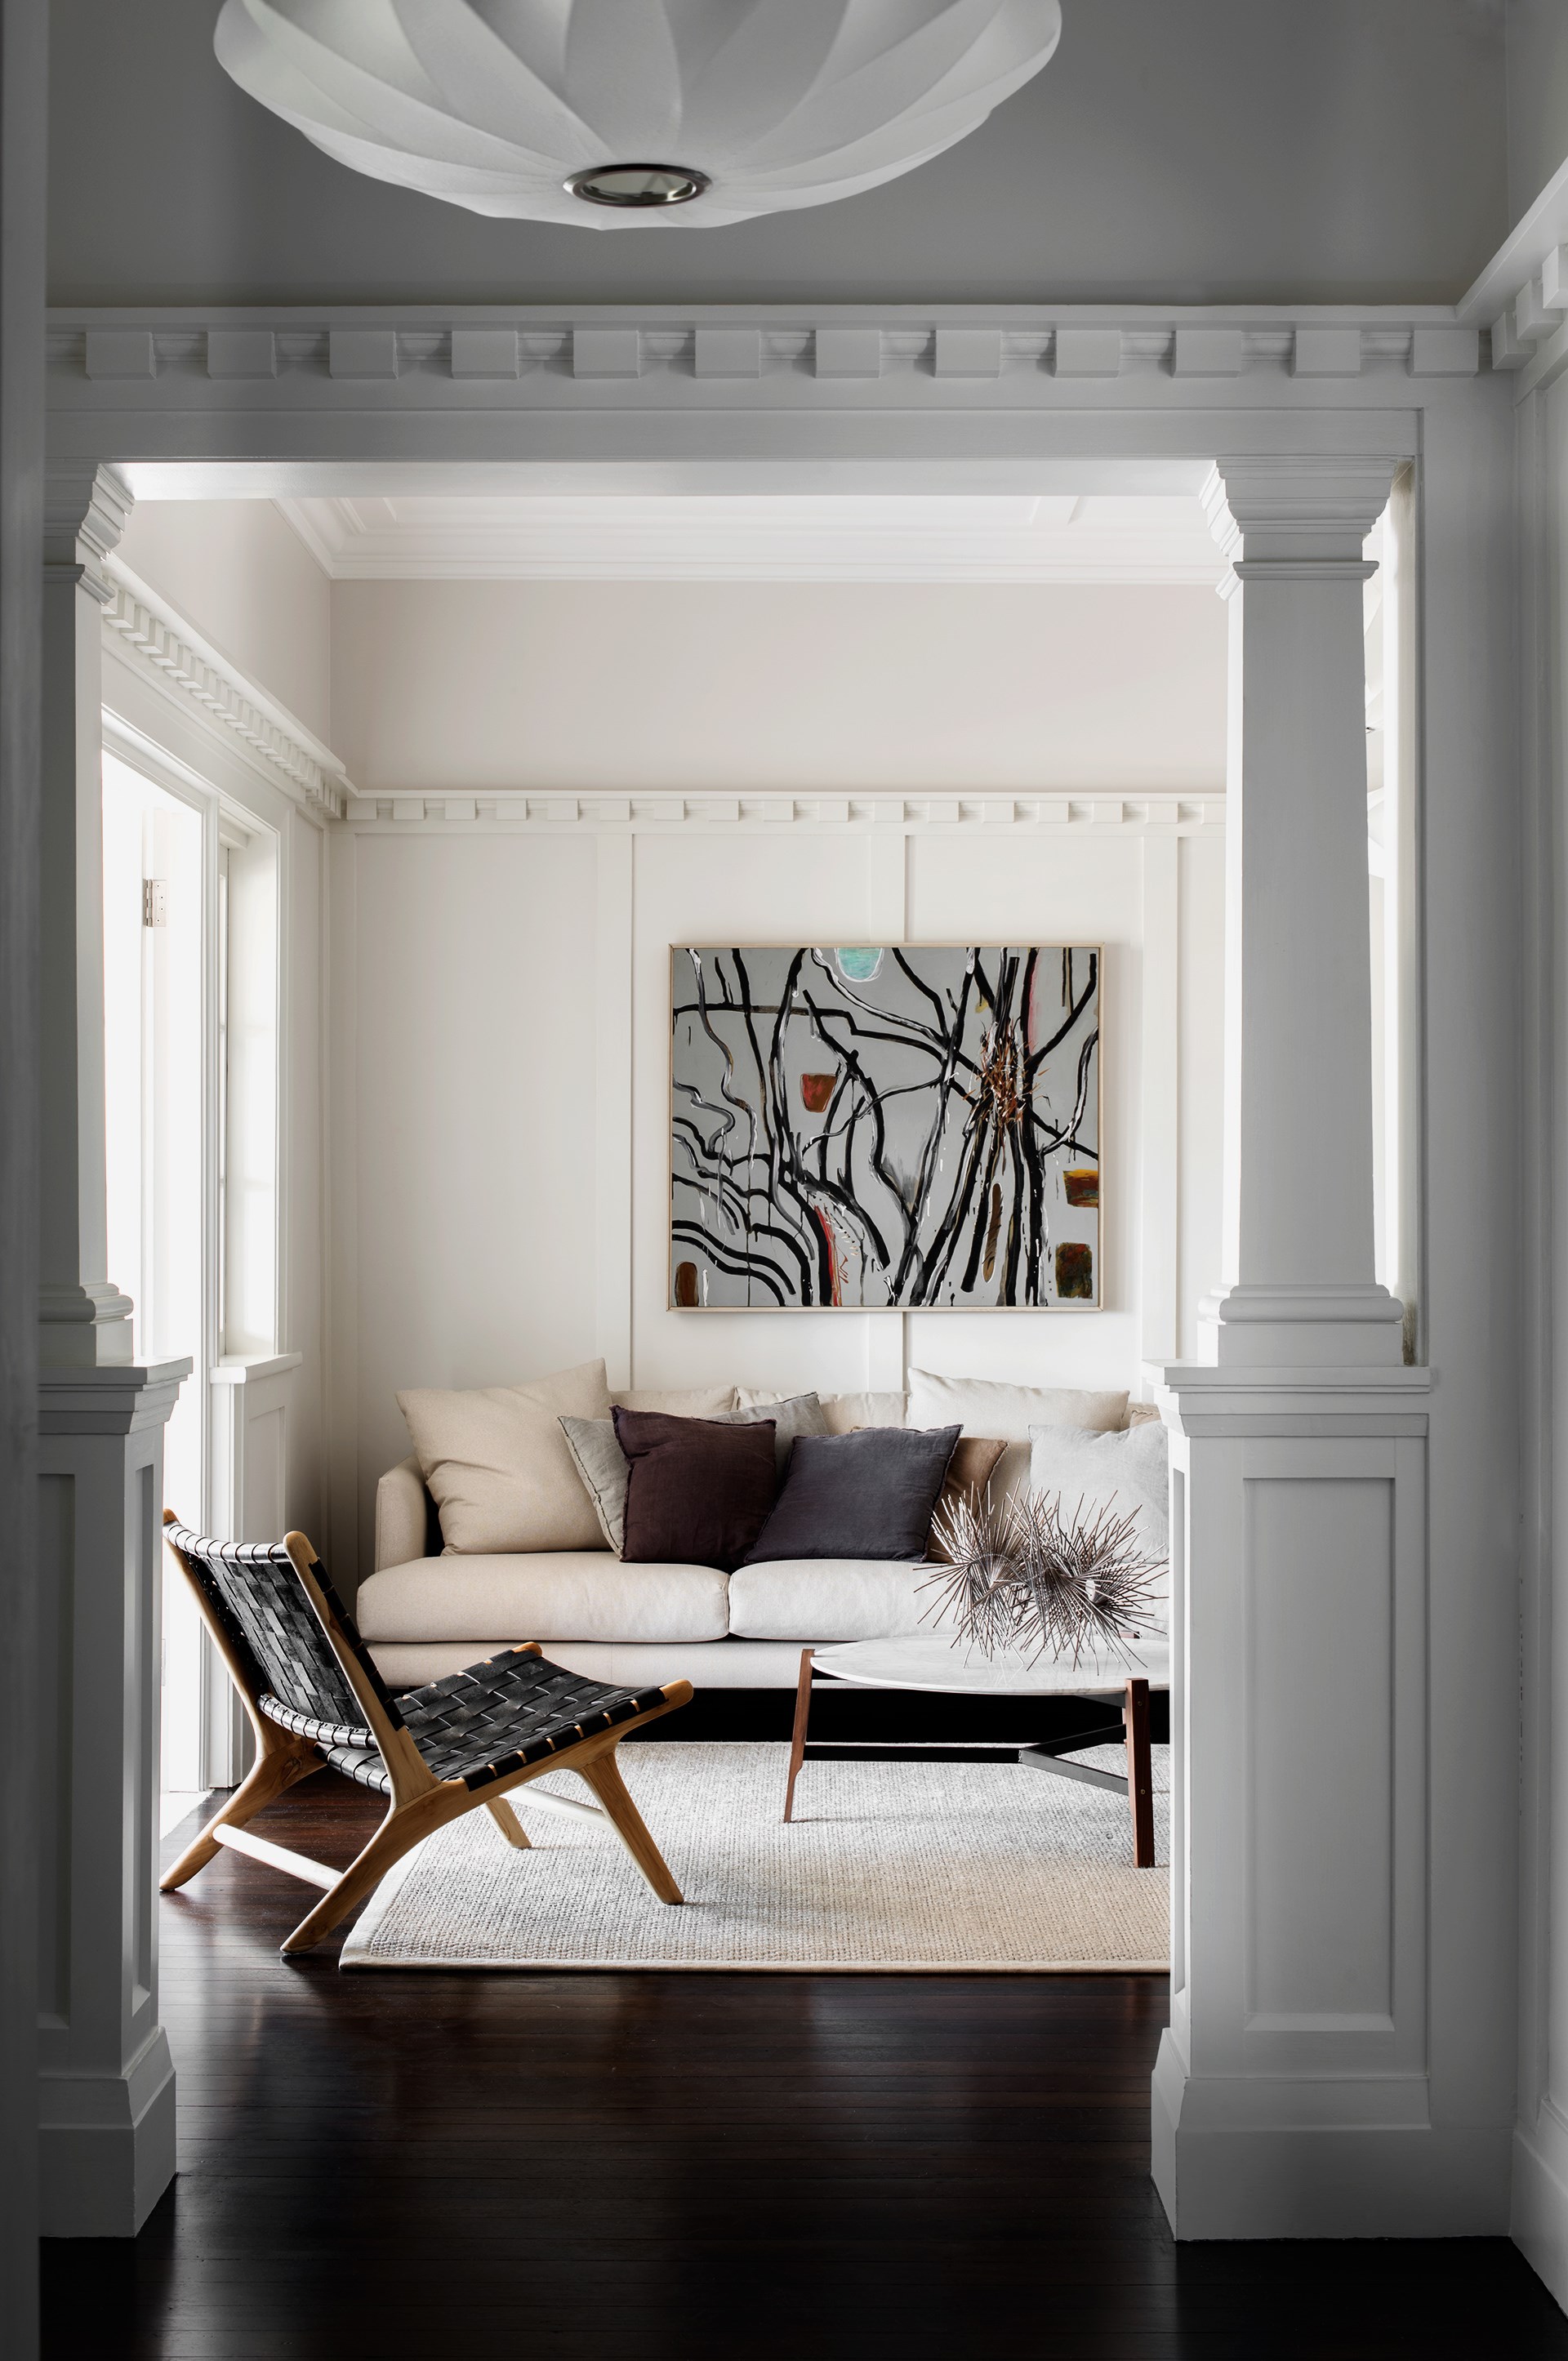 The interiors of [this restored bungalow](https://www.homestolove.com.au/sandstone-house-restored-to-former-glory-3731|target="_blank") in Palm Beach were painted white as not to compete with the heritage mouldings and exposed sandstone walls. An ornate picture rail draws the eye up to the original crown moulding that wraps the space. 